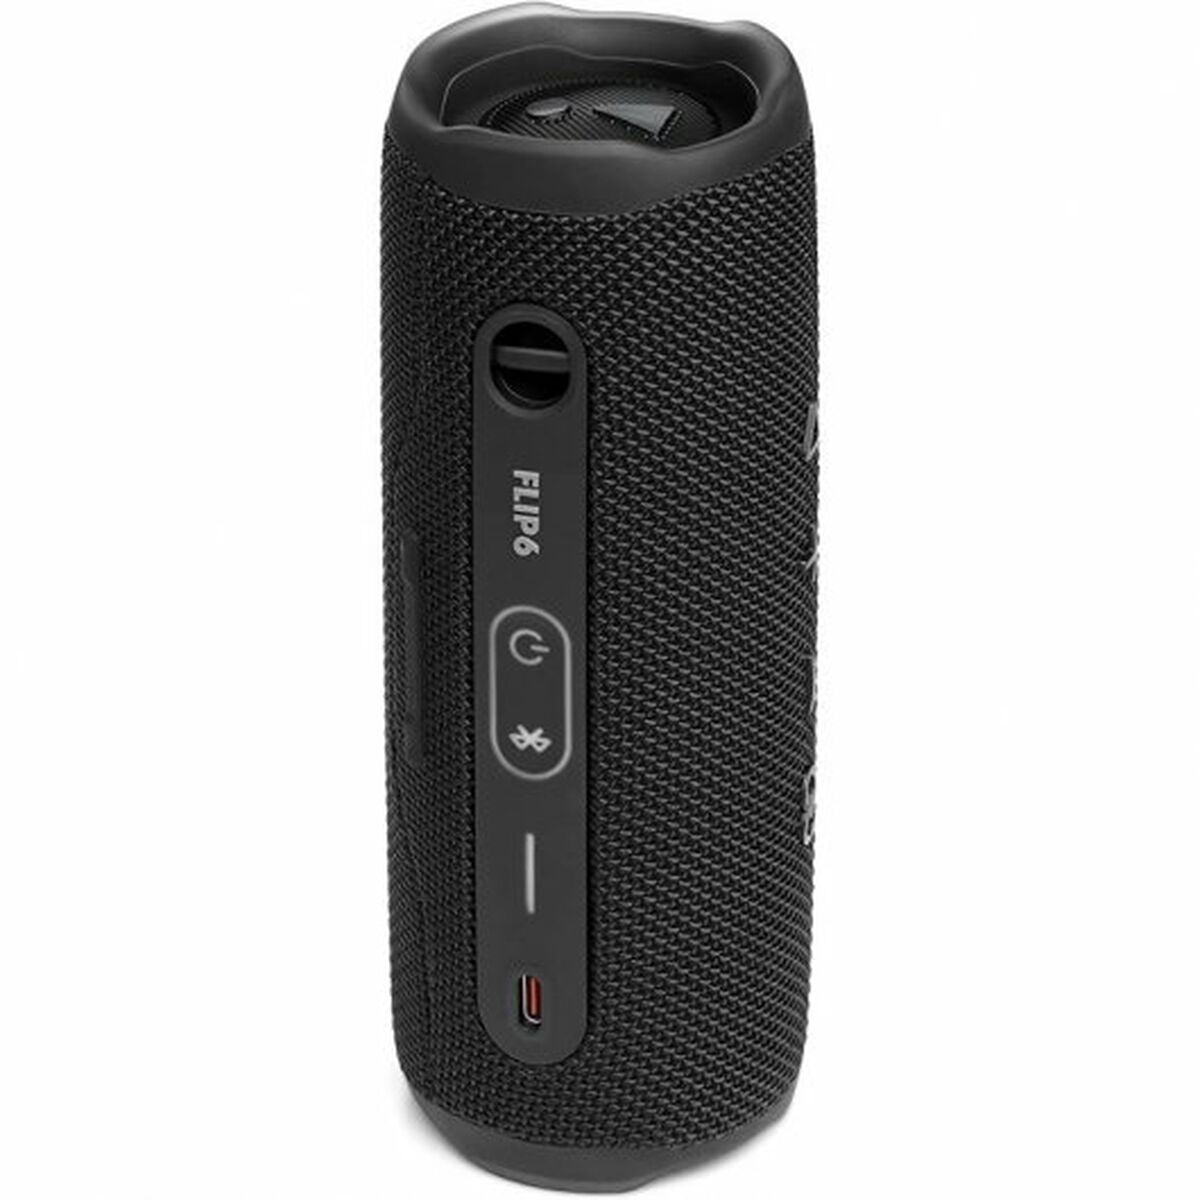 Portable Bluetooth Speakers JBL Flip 6 20 W Black, JBL, Electronics, Mobile communication and accessories, portable-bluetooth-speakers-jbl-flip-6-20-w-black, Brand_JBL, category-reference-2609, category-reference-2882, category-reference-2923, category-reference-t-19653, category-reference-t-21311, category-reference-t-25527, category-reference-t-4036, category-reference-t-4037, Condition_NEW, entertainment, music, Price_100 - 200, telephones & tablets, wifi y bluetooth, RiotNook